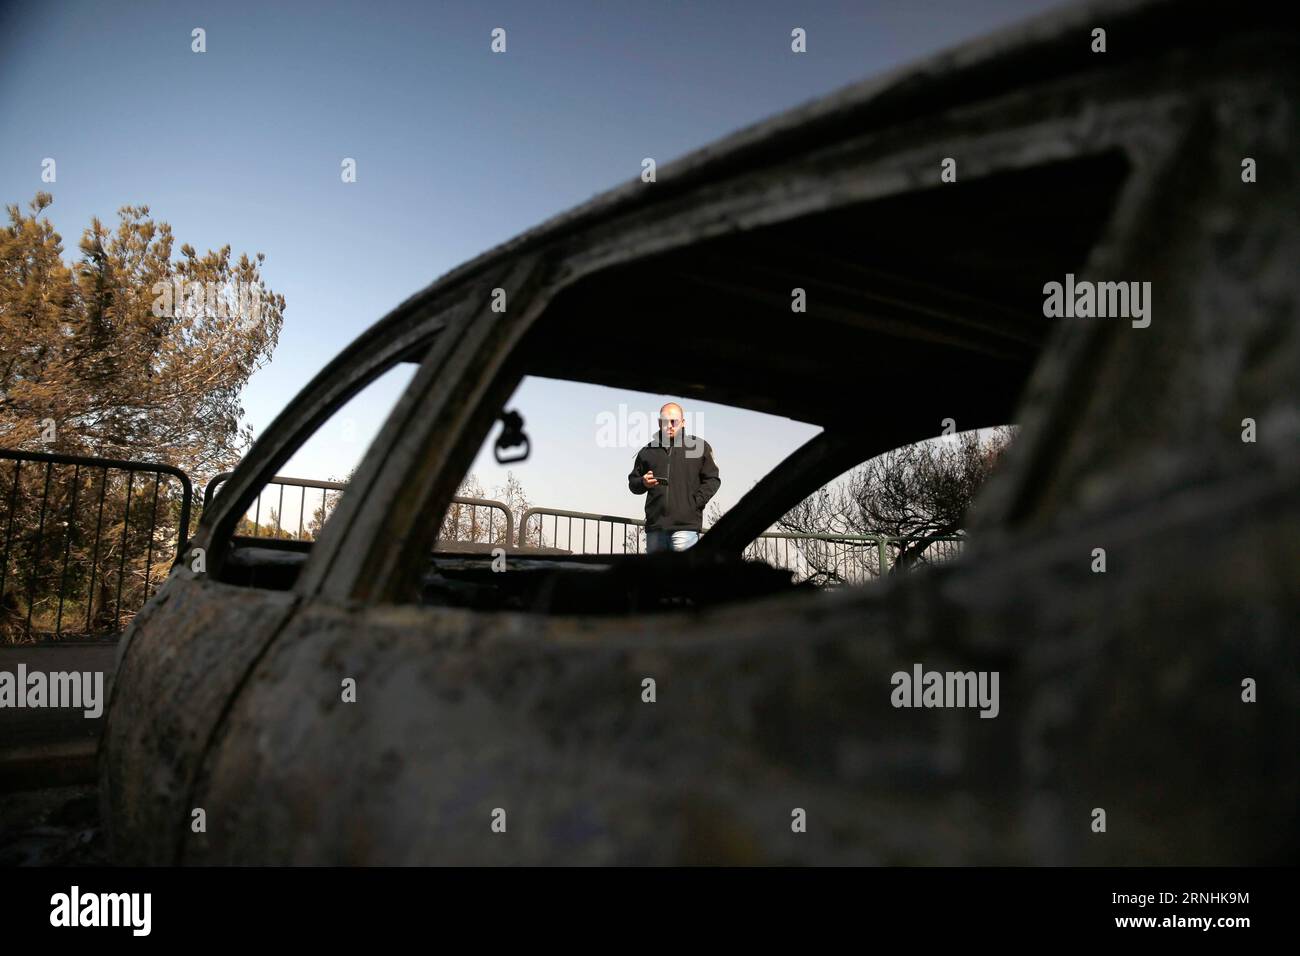 (161125) -- HAIFA (ISRAEL), Nov. 25, 2016 -- A man looks at fire damaged cars in Haifa, Israel, on Nov. 25, 2016. Fires on Thursday forced a widespread evacuation in Haifa, as foreign countries sent in firefighting planes to help put out a three-day wave of forest fires throughout Israel. /Daniel Bar) ISRAEL-HAIFA-FIRE JINI PUBLICATIONxNOTxINxCHN   Haifa Israel Nov 25 2016 a Man Looks AT Fire damaged Cars in Haifa Israel ON Nov 25 2016 Fires ON Thursday Forced a Widespread Evacuation in Haifa As Foreign Countries Sent in firefighting Plan to Help Put out a Three Day Wave of Forest Fires throug Stock Photo